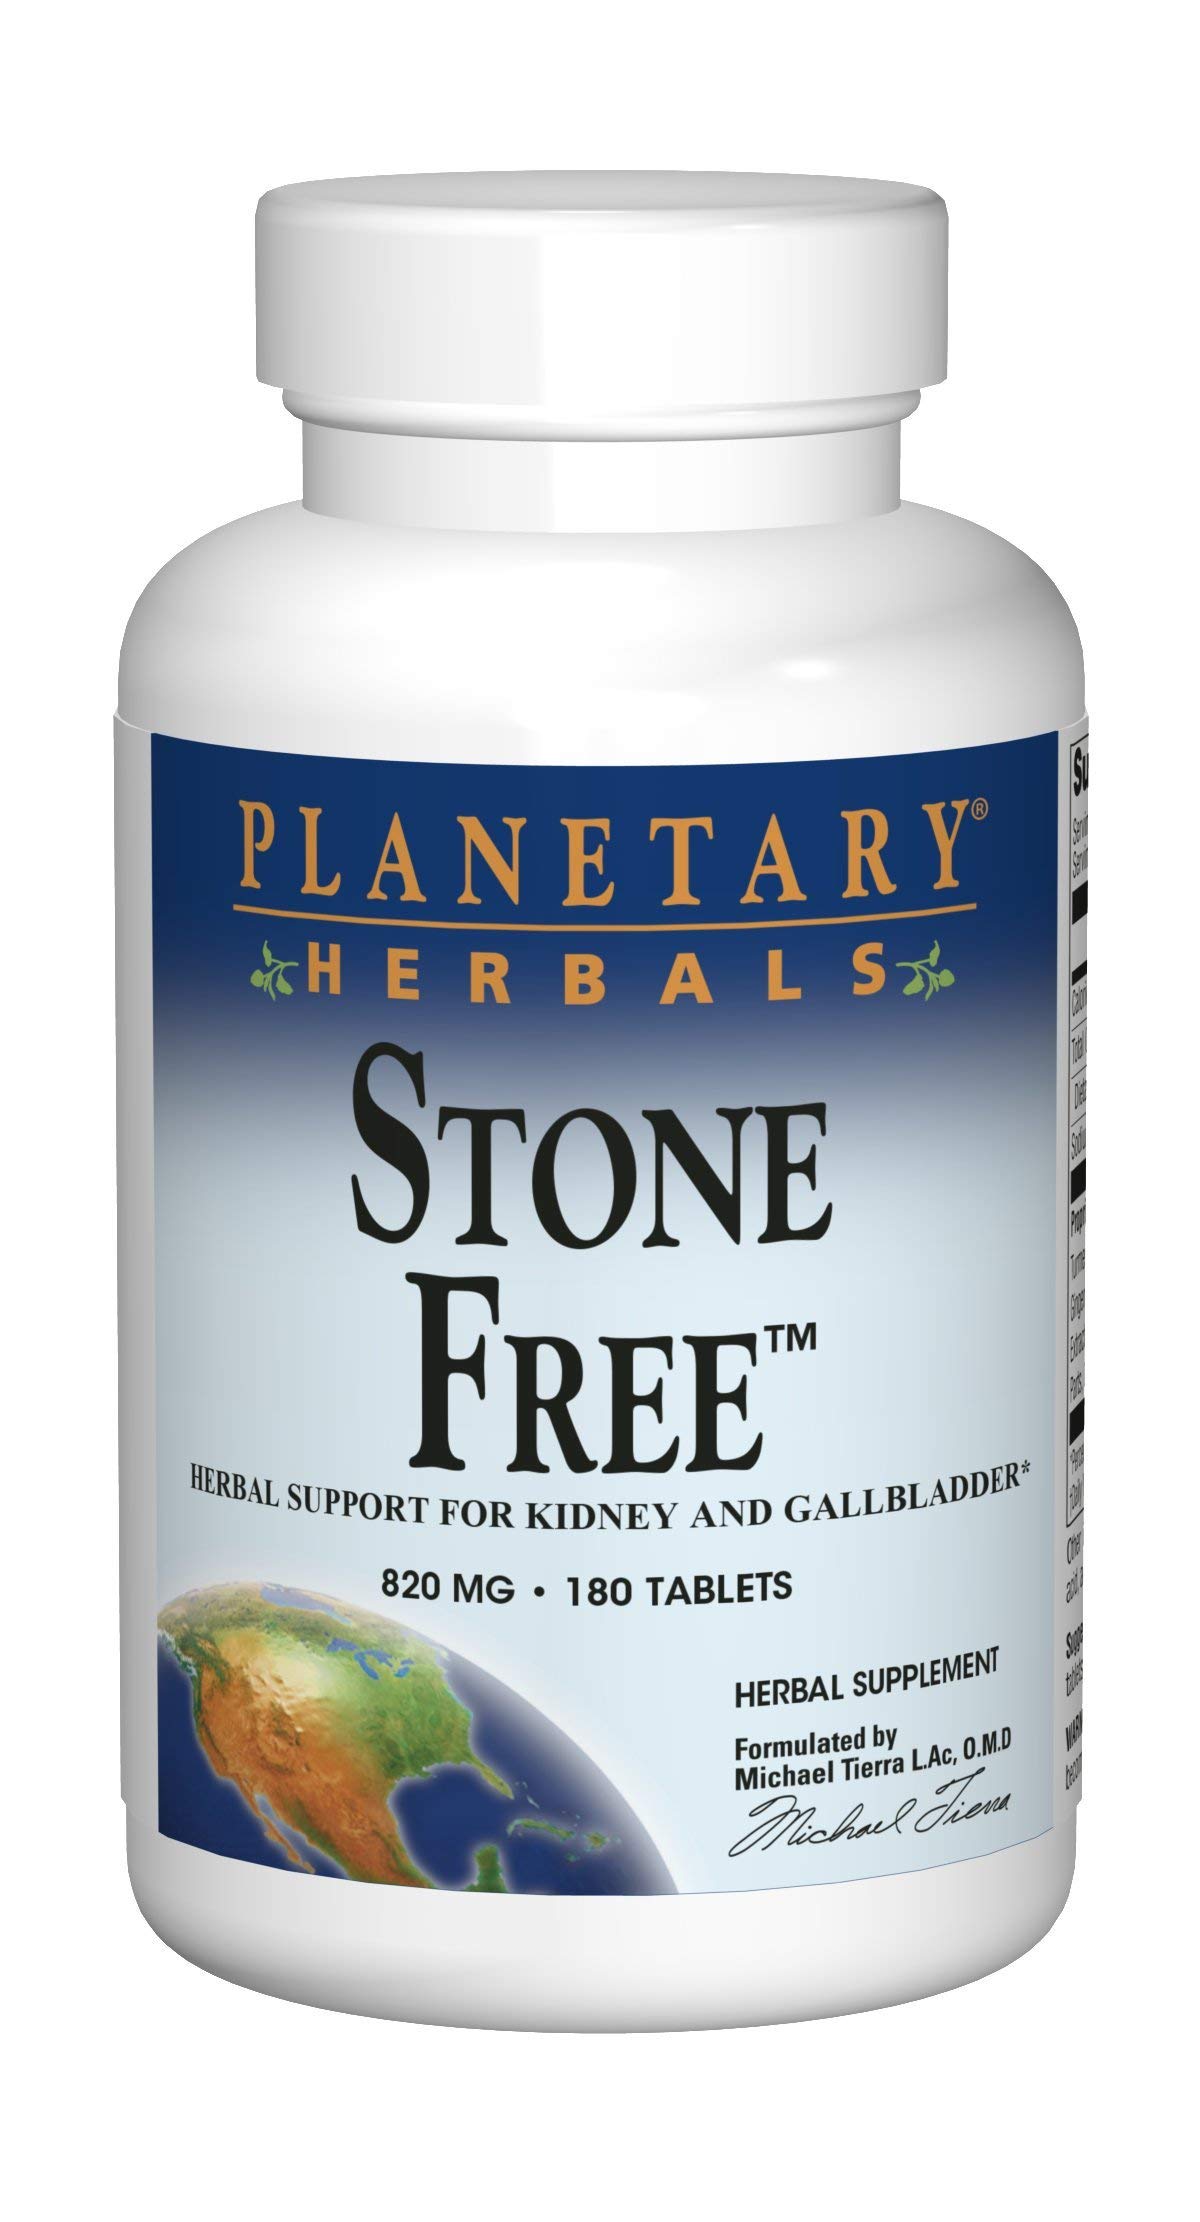 Planetary Herbals Stone Free 820 mg Herbal Support for Kidney and Gallbladder 180 Tablet